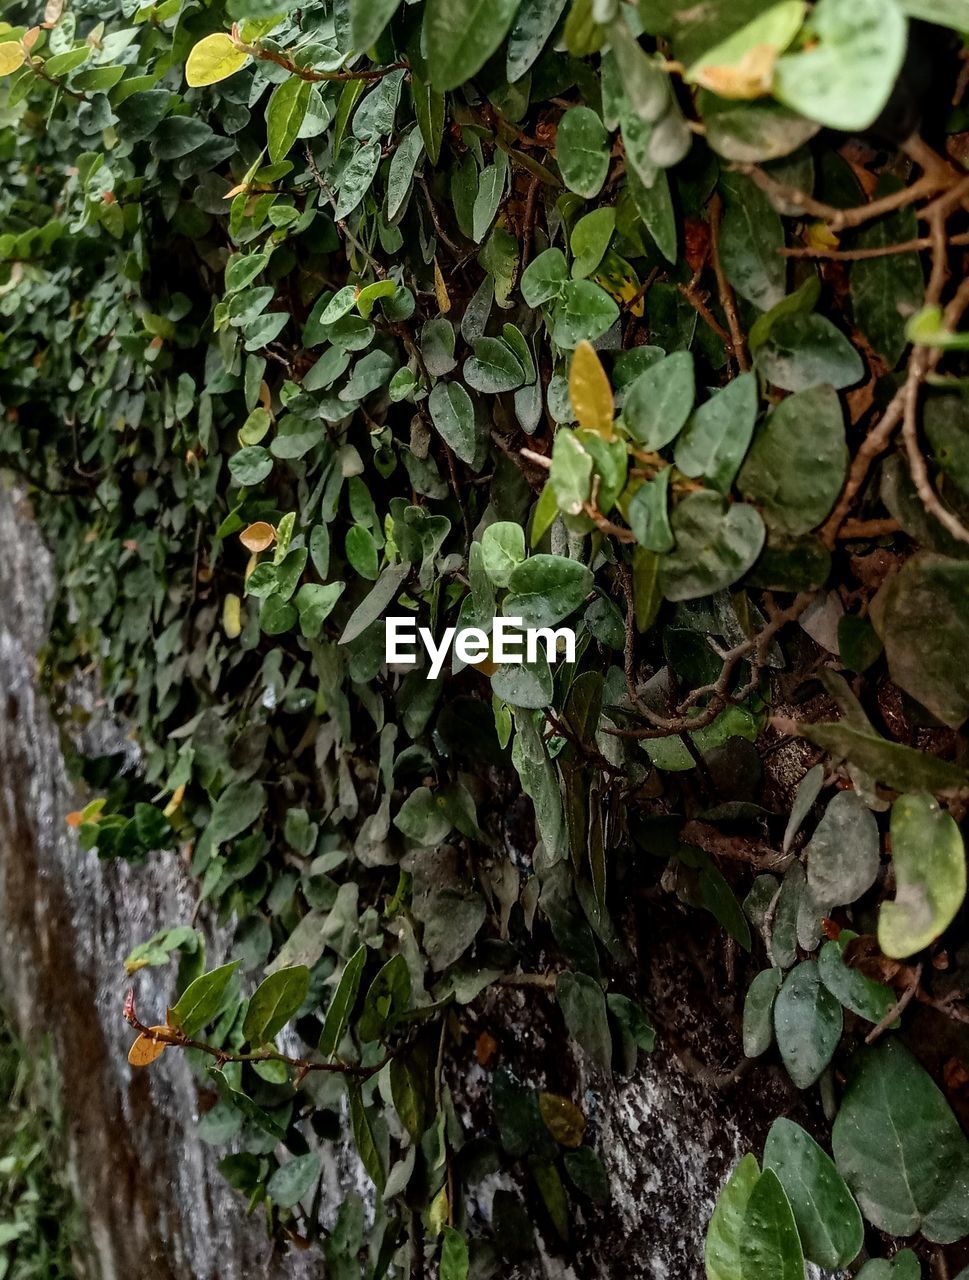 HIGH ANGLE VIEW OF IVY GROWING ON TREE